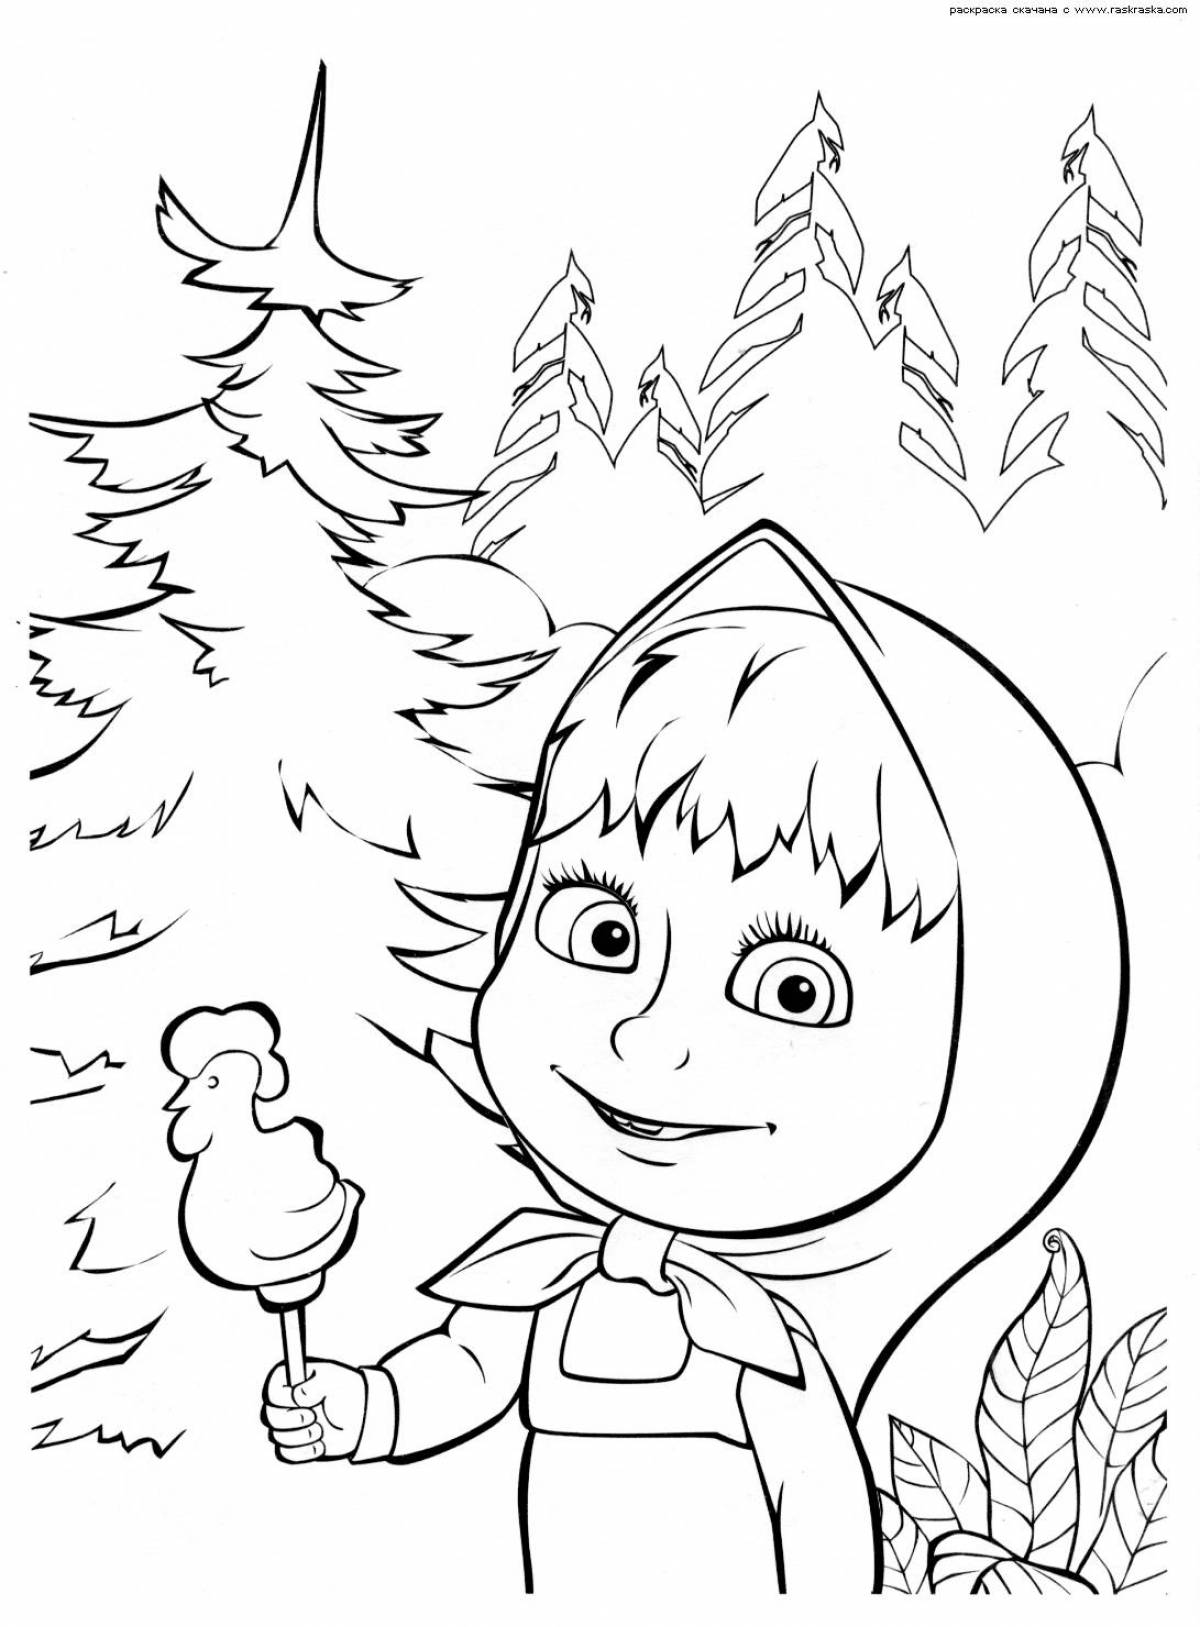 Colourful coloring Masha and the bear for children